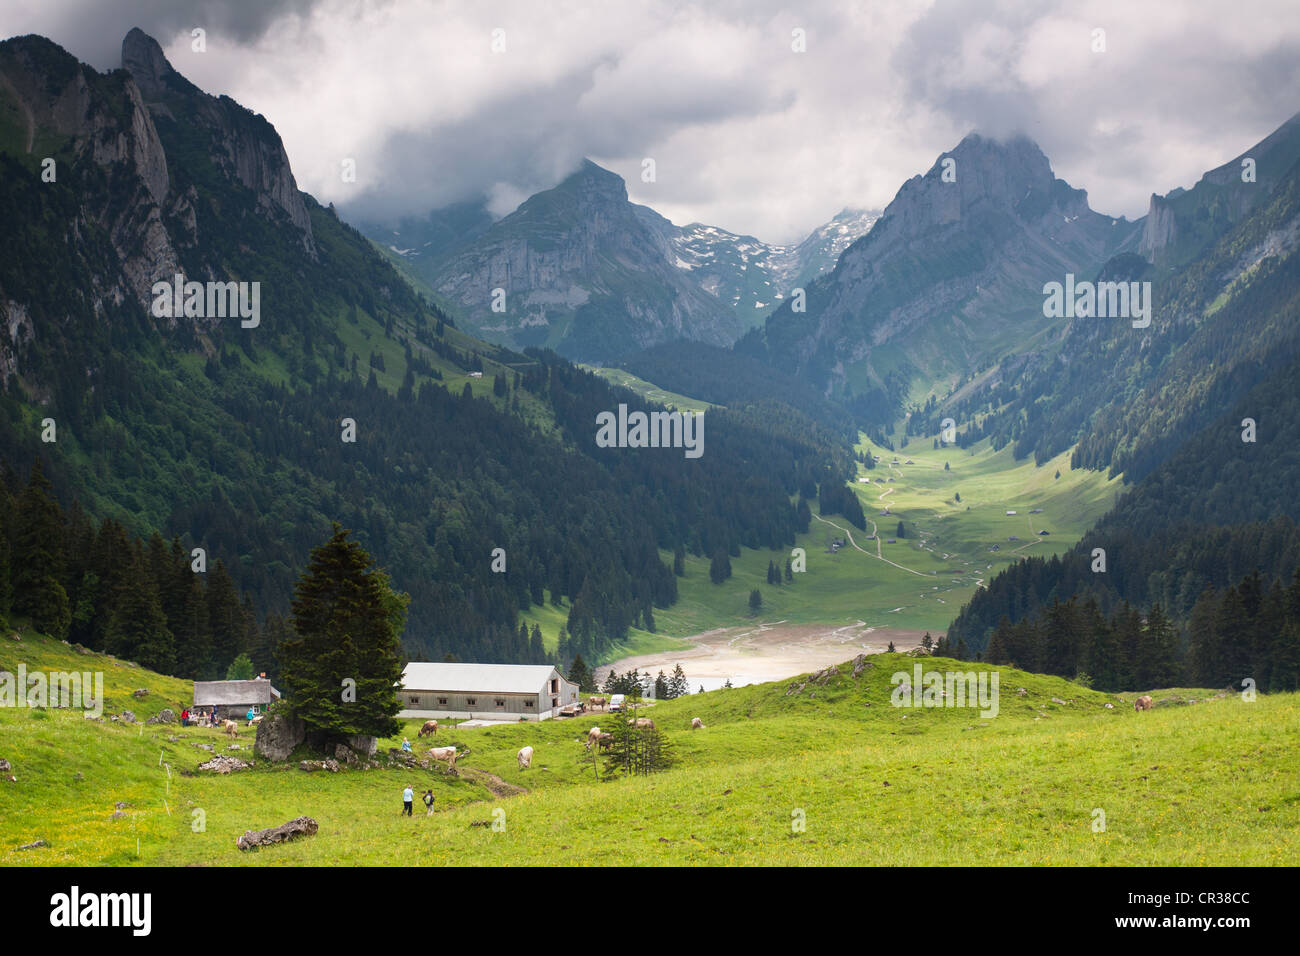 Farm on the Soll alp, mountain pasture, in the Alpstein area with views towards Saemtisersee Lake and Mt Widderalpstoeck, Stock Photo